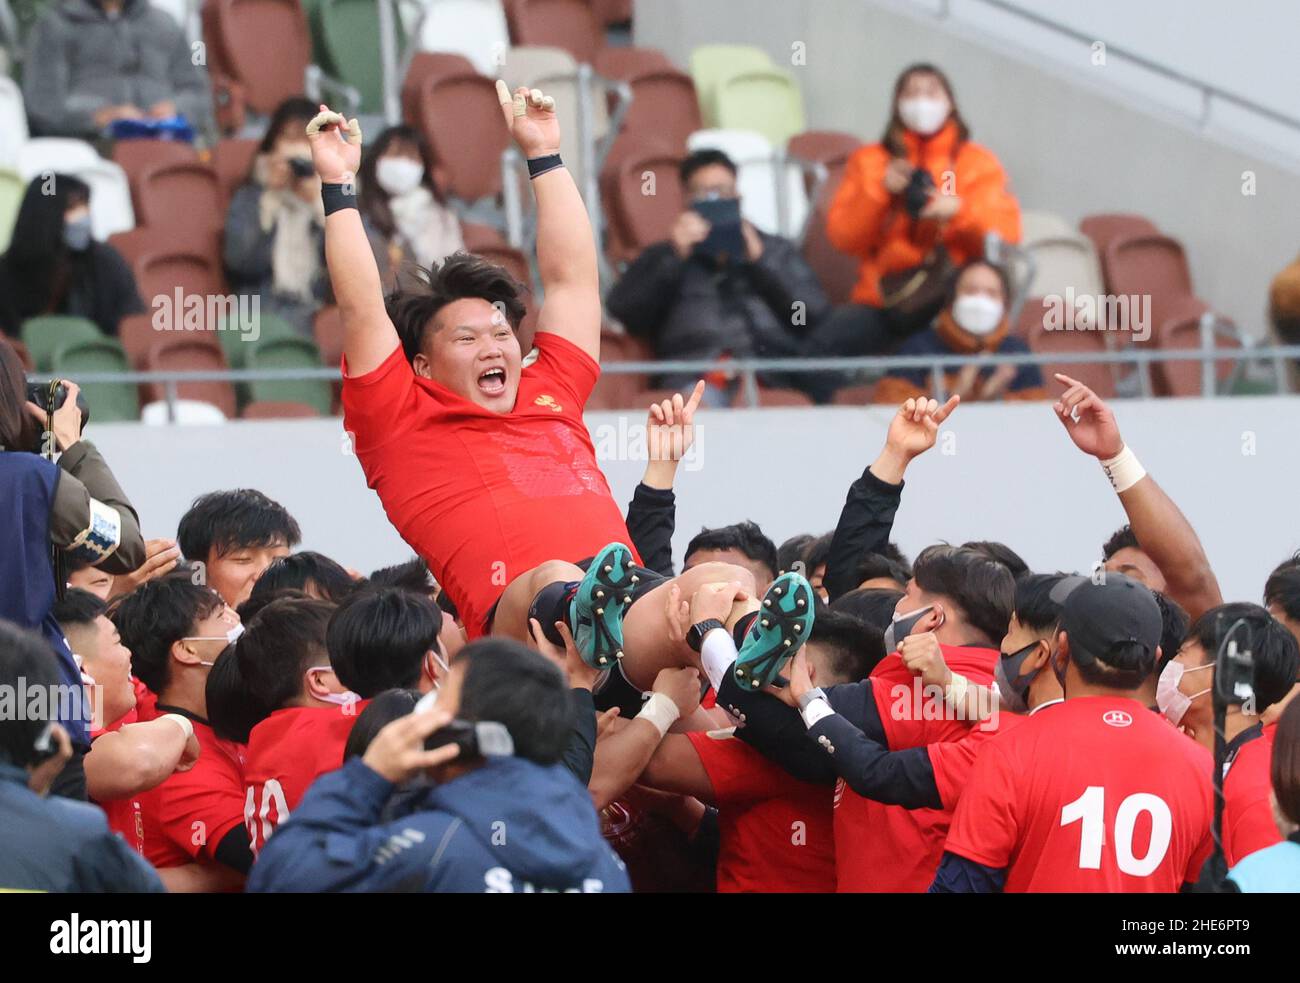 Tokyo, Japan. 9th Jan, 2022. Teikyo University rugby team captain Kotaro Hosoki is tossed up in the air by team members as they celebrate their victory of the Japan University Rugby Championship at the national stadium in Tokyo on Sunday, January 9, 2022. Teikyo University defeated Meiji University 27-14 in the final. Credit: Yoshio Tsunoda/AFLO/Alamy Live News Stock Photo